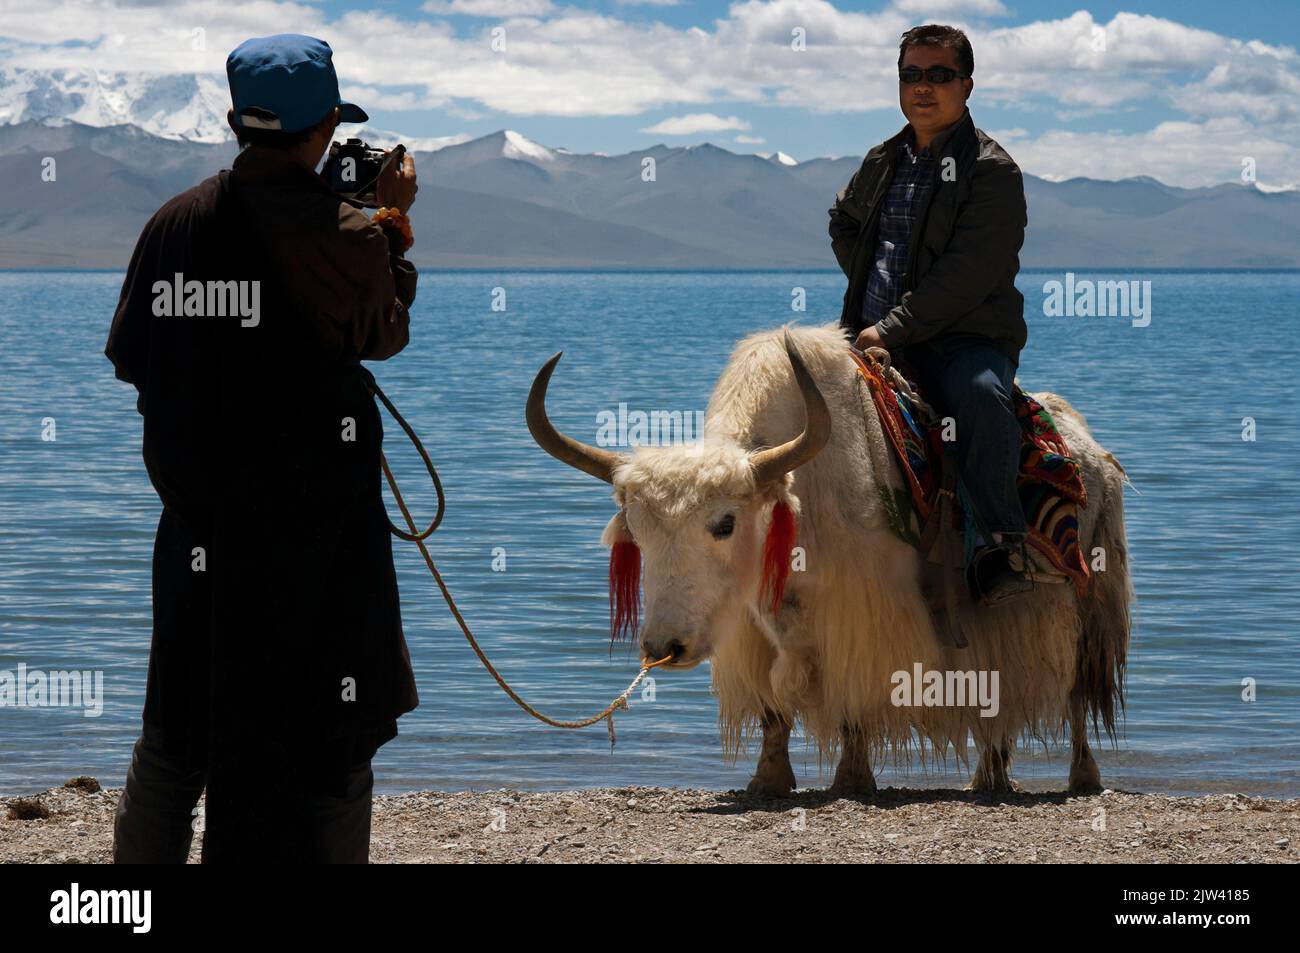 Tourists and yaks in Nam Tso Lake (Nam Co) in Nyainqentanglha mountains, Tibet.  The drop in temperatures with the consequent decrease in snowfall end Stock Photo